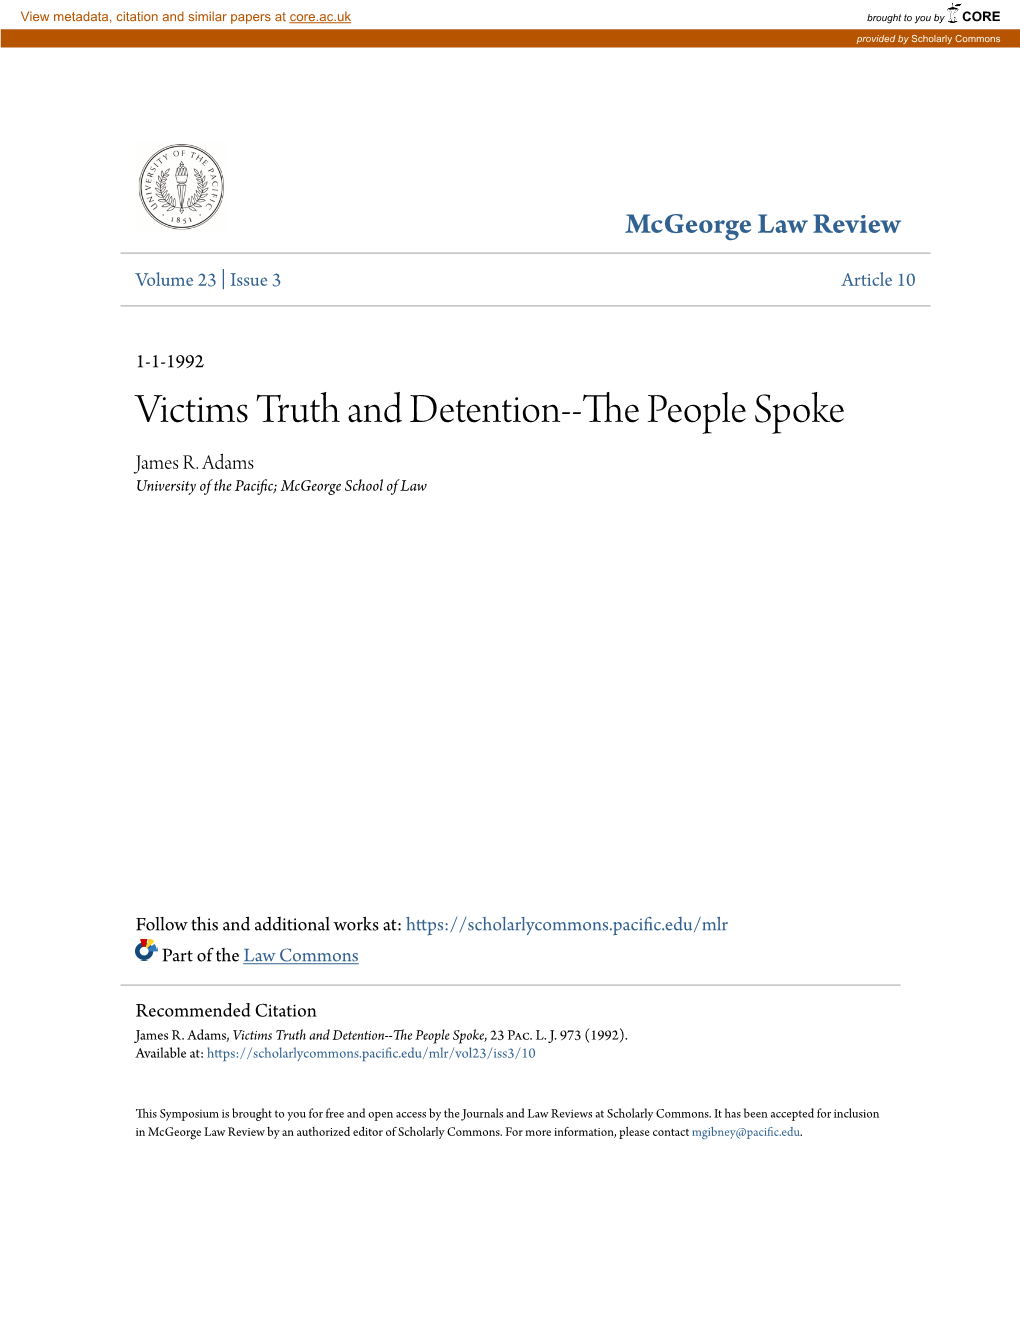 Victims Truth and Detention--The Eoplep Spoke James R